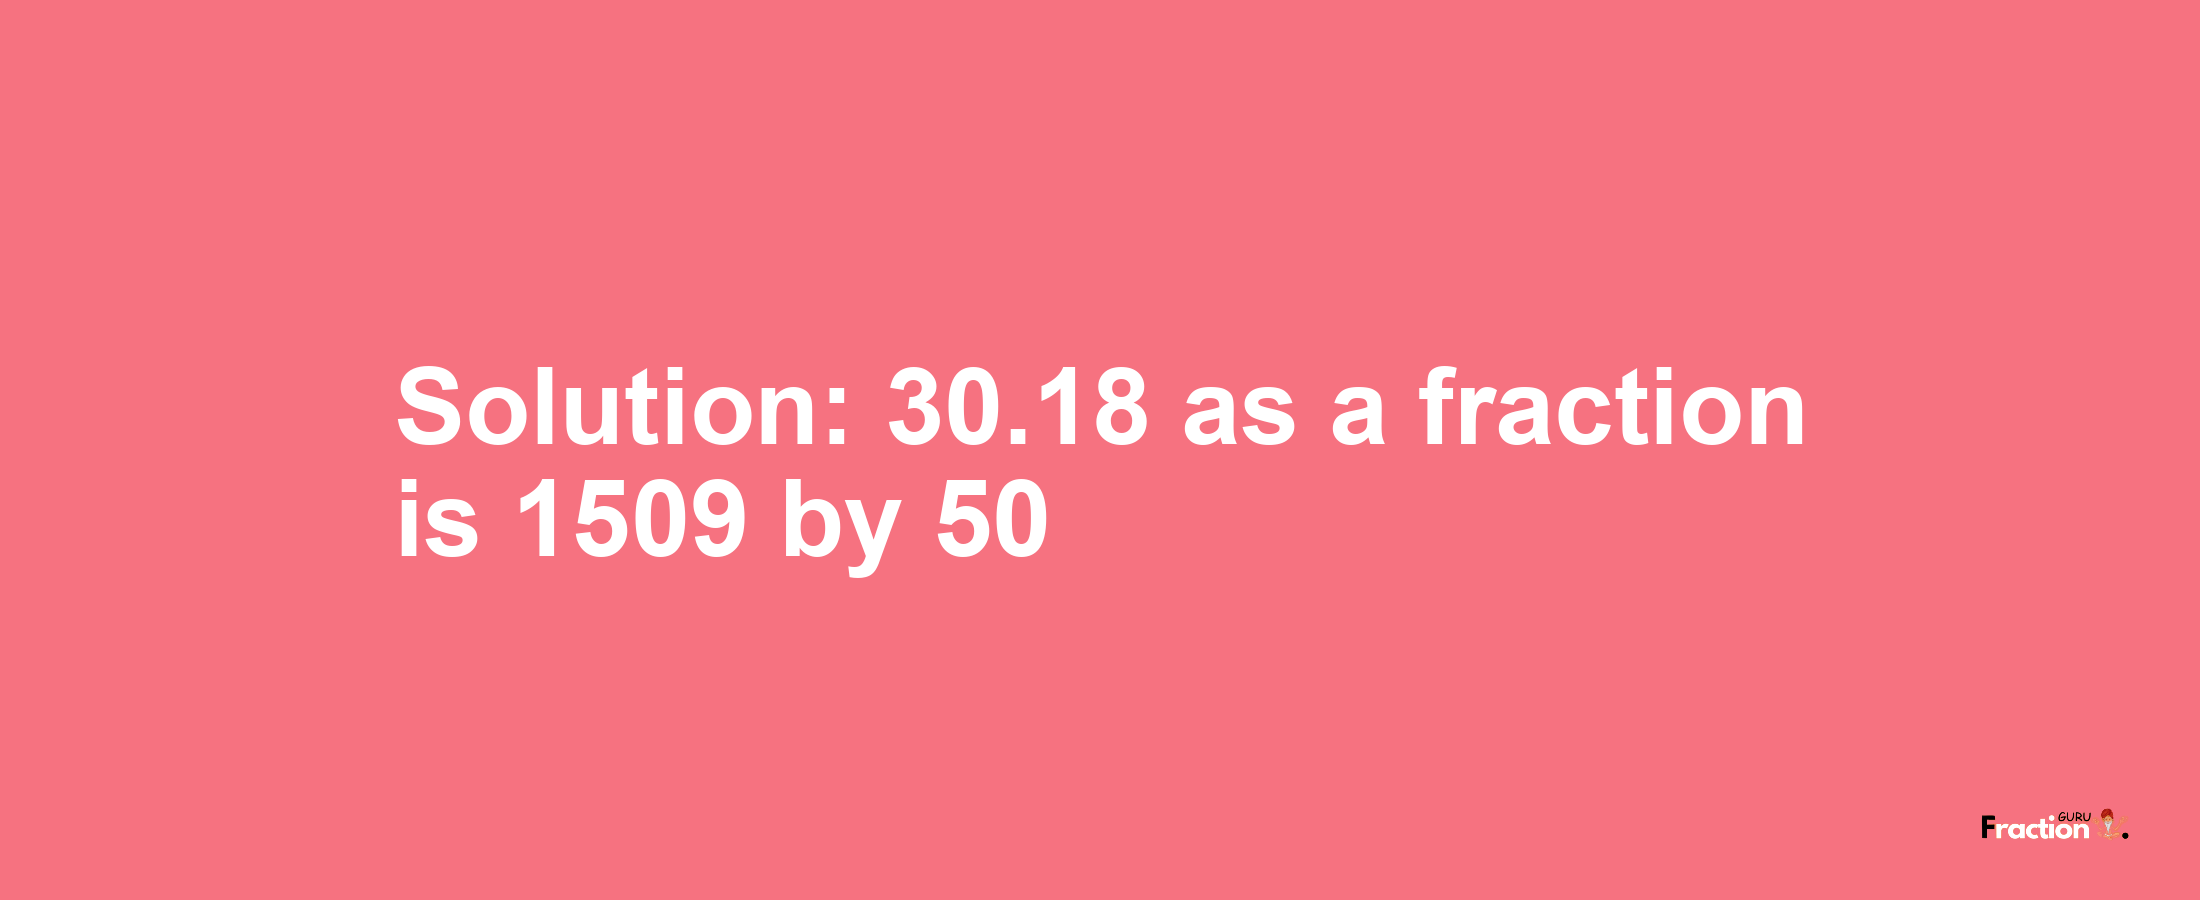 Solution:30.18 as a fraction is 1509/50